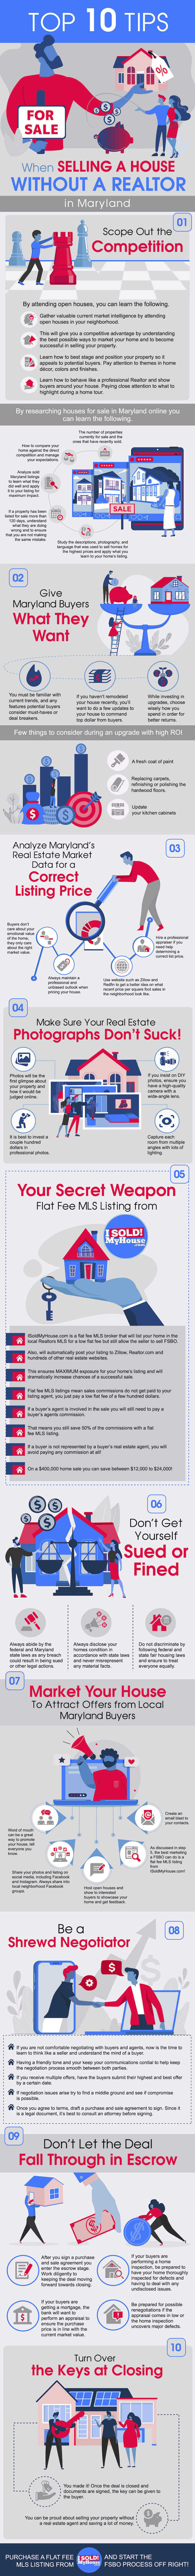 infographic of the 10 steps to sell a house in maryland without an agent